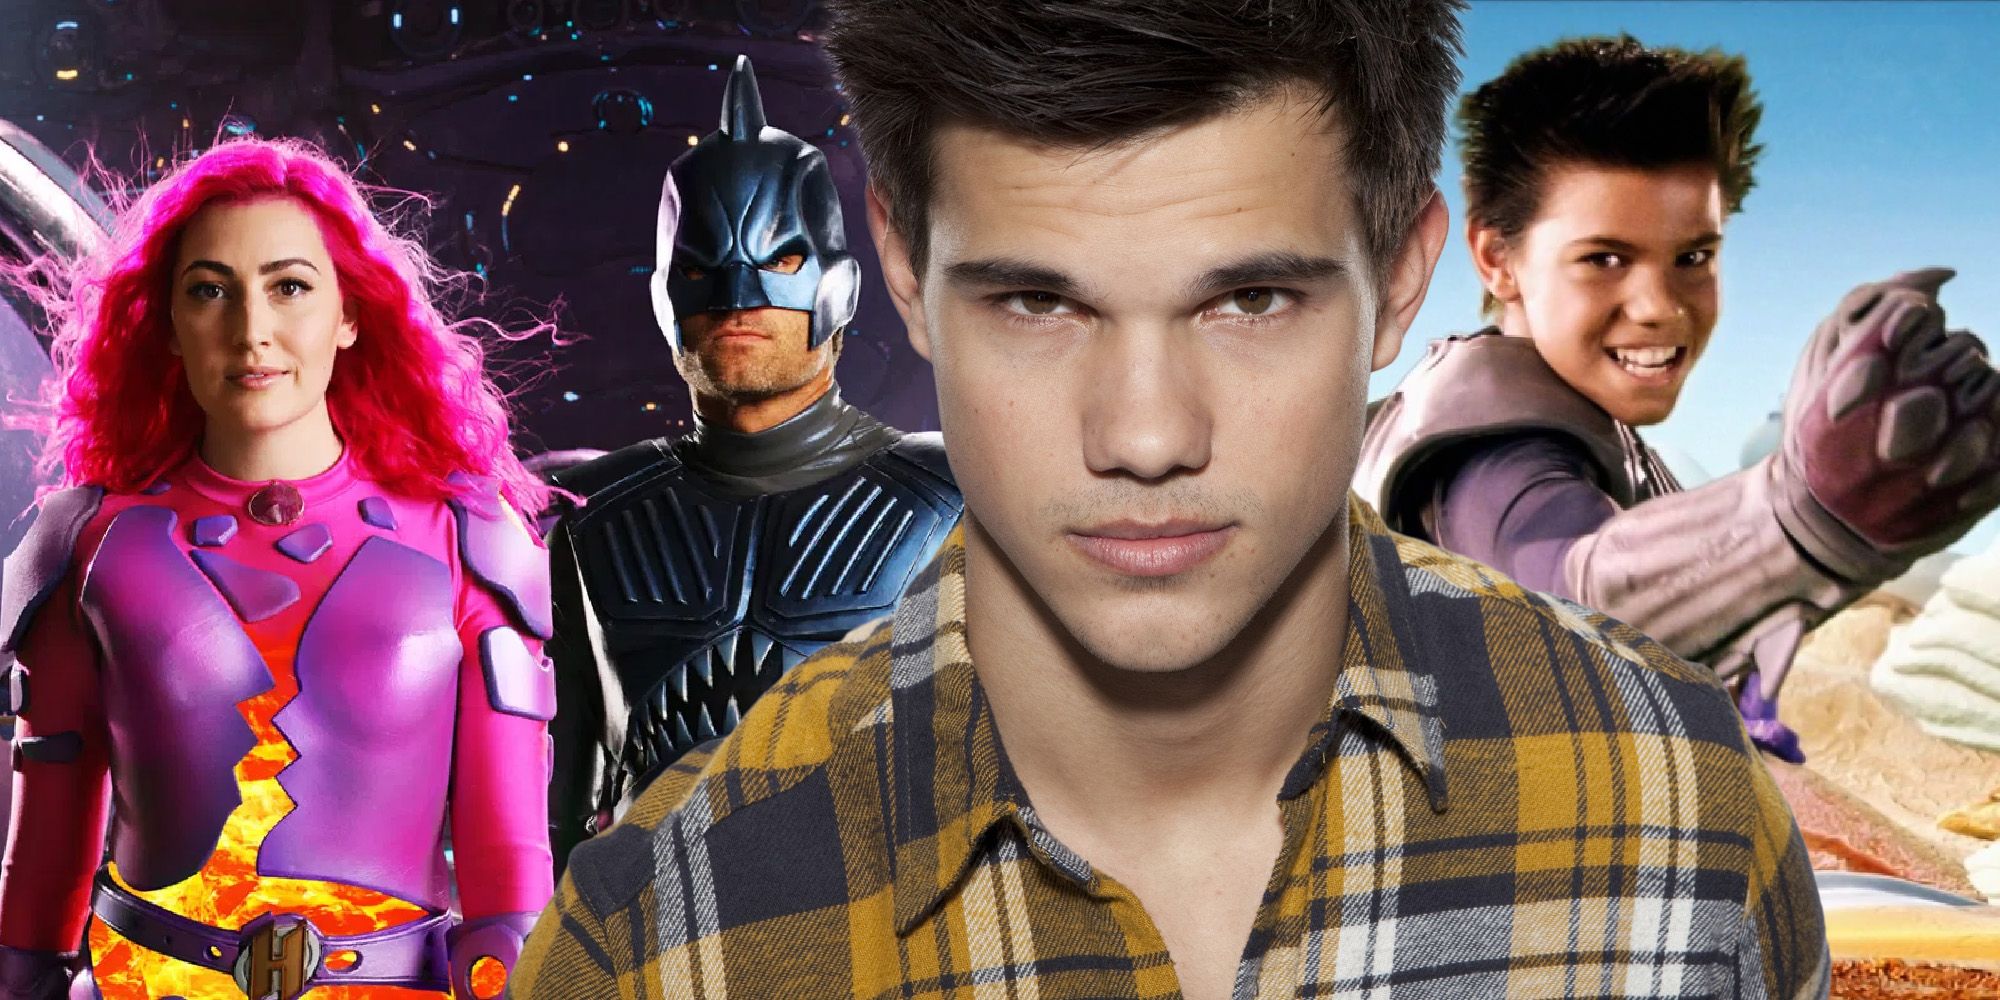 Taylor lautner Sharkboy we can be heroes lavagirl